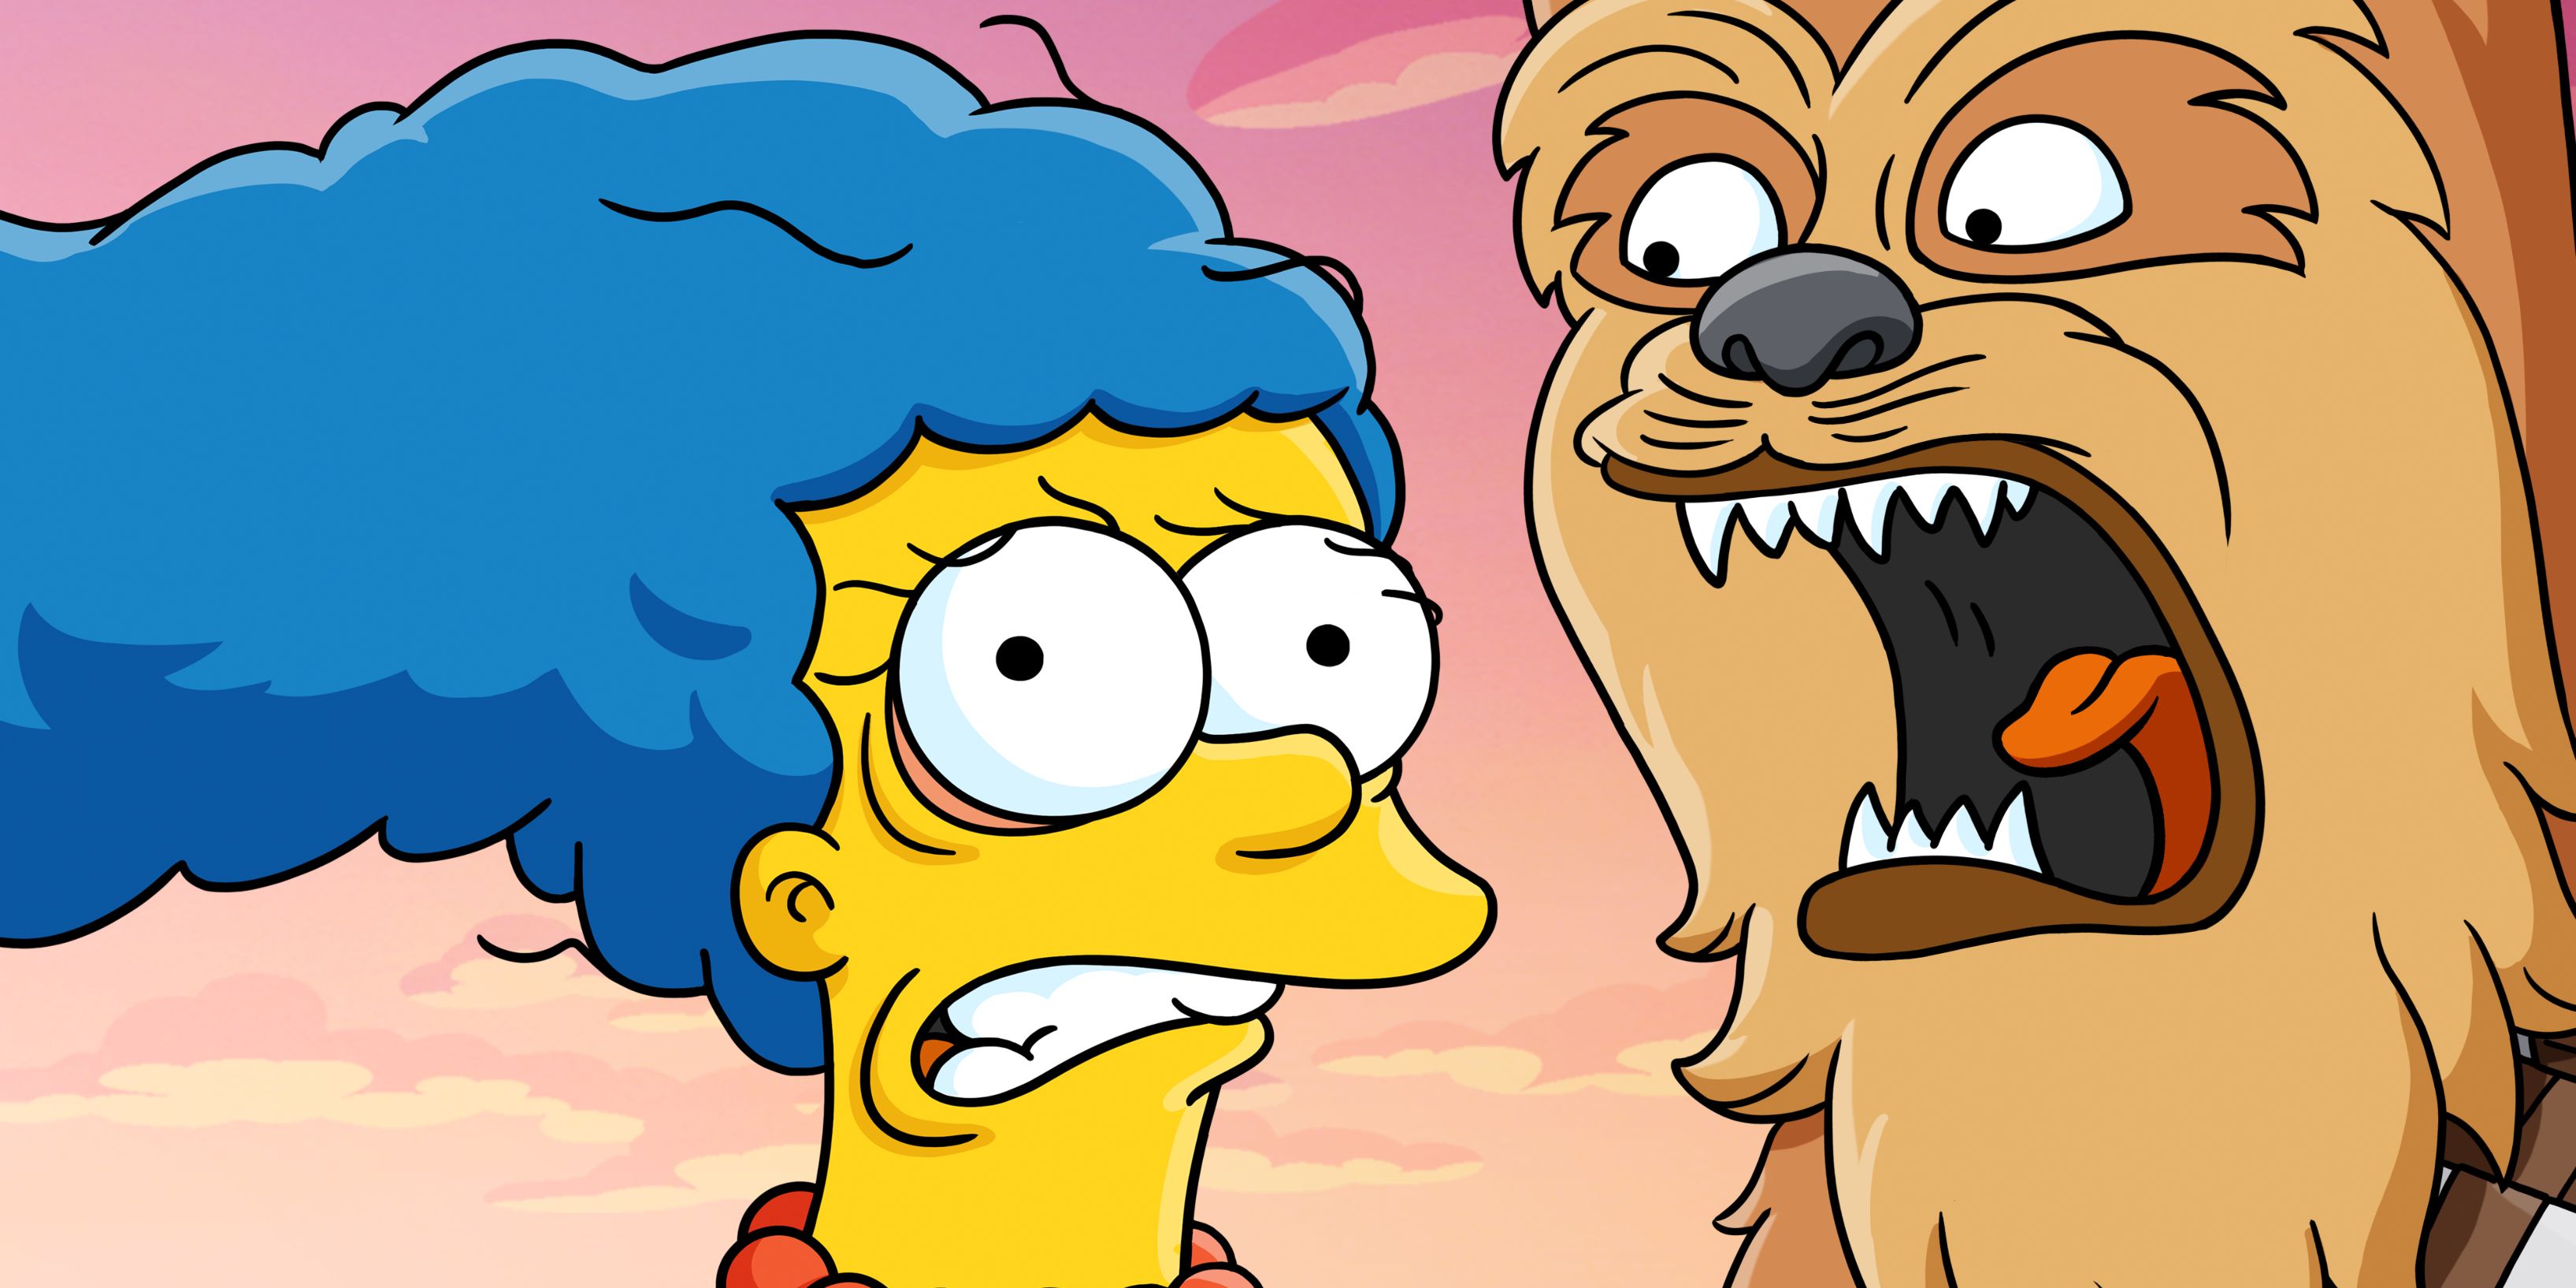 The Simpsons to Celebrate Mother's Day With Star Wars Short on Disney+